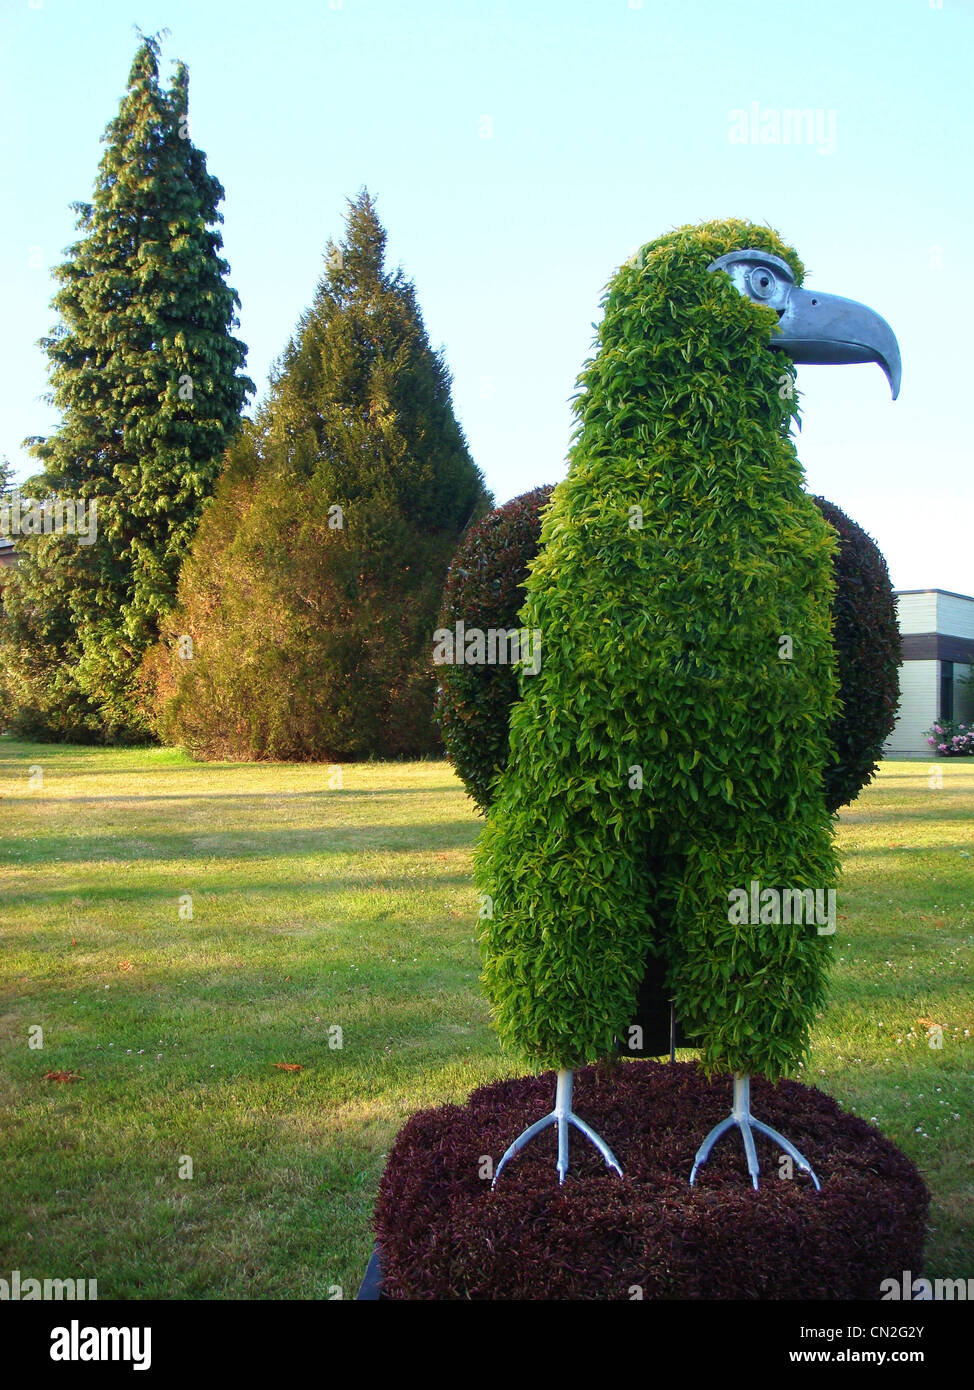 Big bird symbol stood out in the garden Stock Photo